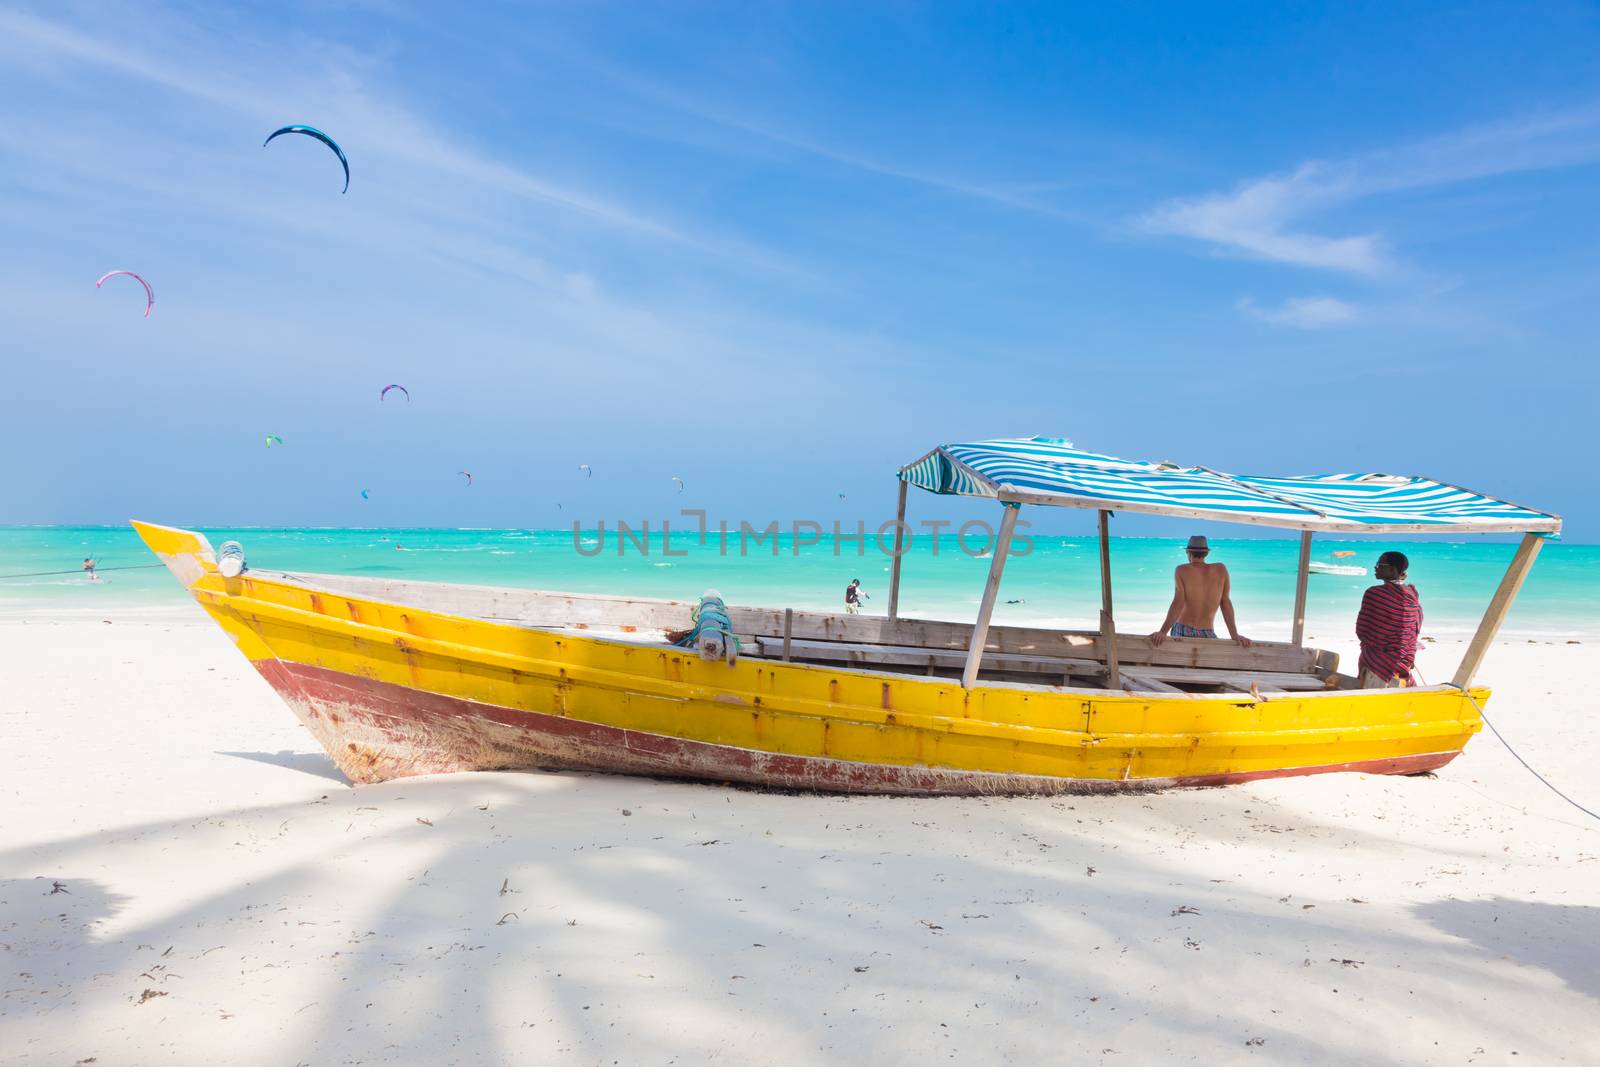 Caucasian tourist and Maasai warrior lounging aroundon traditional colorful wooden boat on picture perfect tropical sandy beach on Zanzibar, Tanzania, East Africa. Kiteboarding spot on Paje beach.